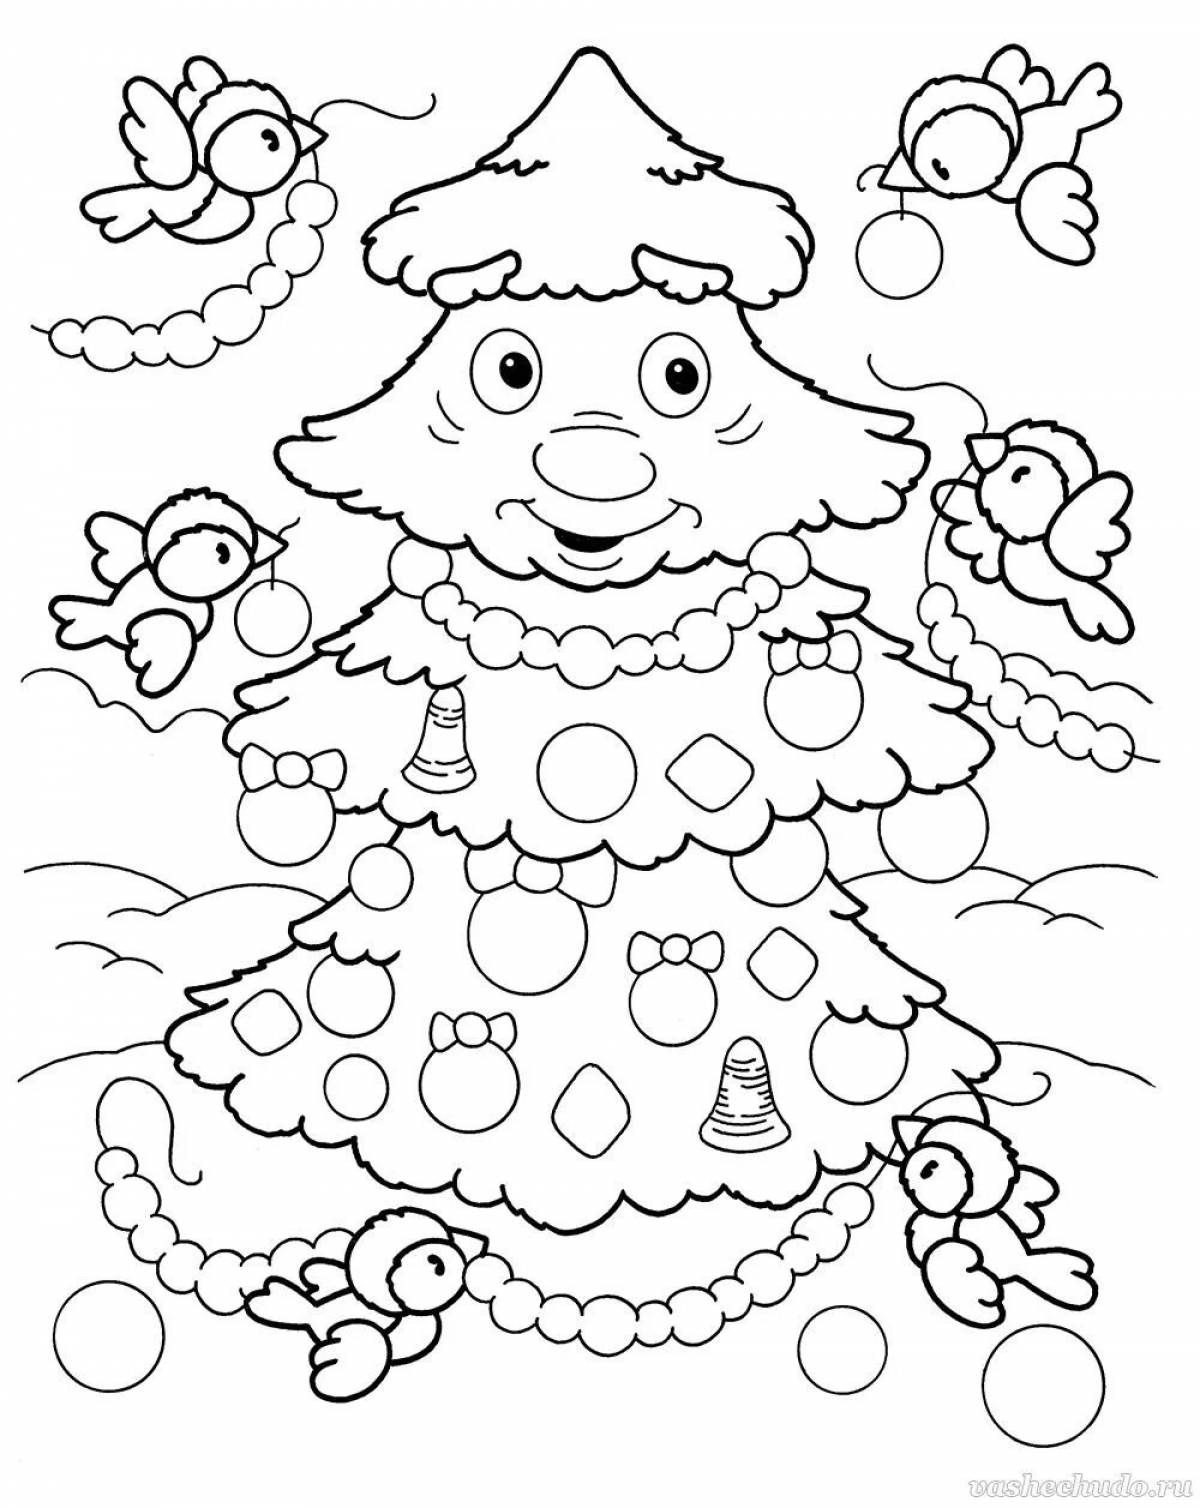 Sweet Christmas tree coloring book for children 5-6 years old